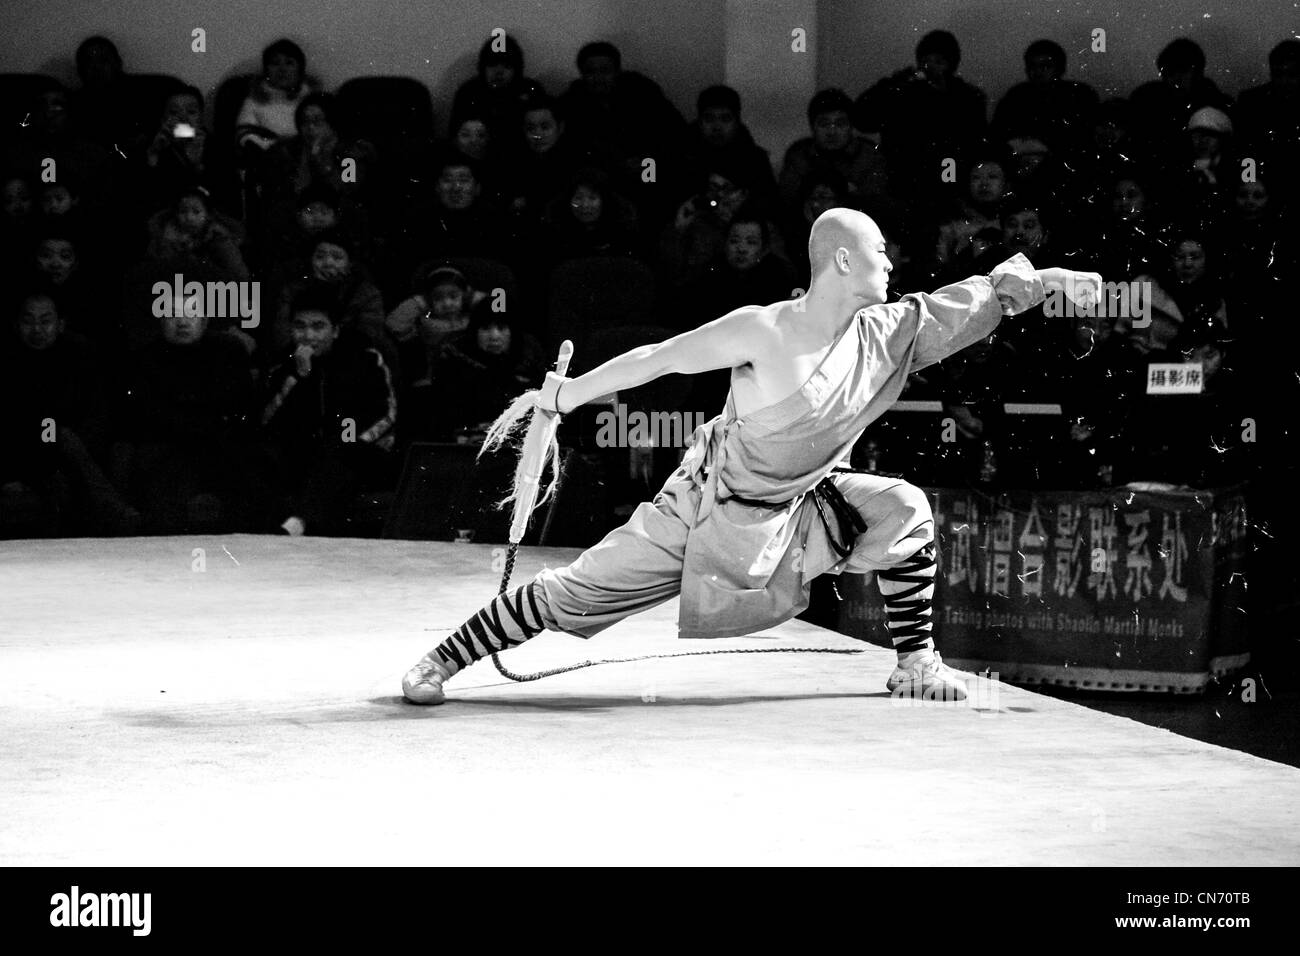 A Shaolin monk with a whip giving a martial arts performance for the audience Stock Photo